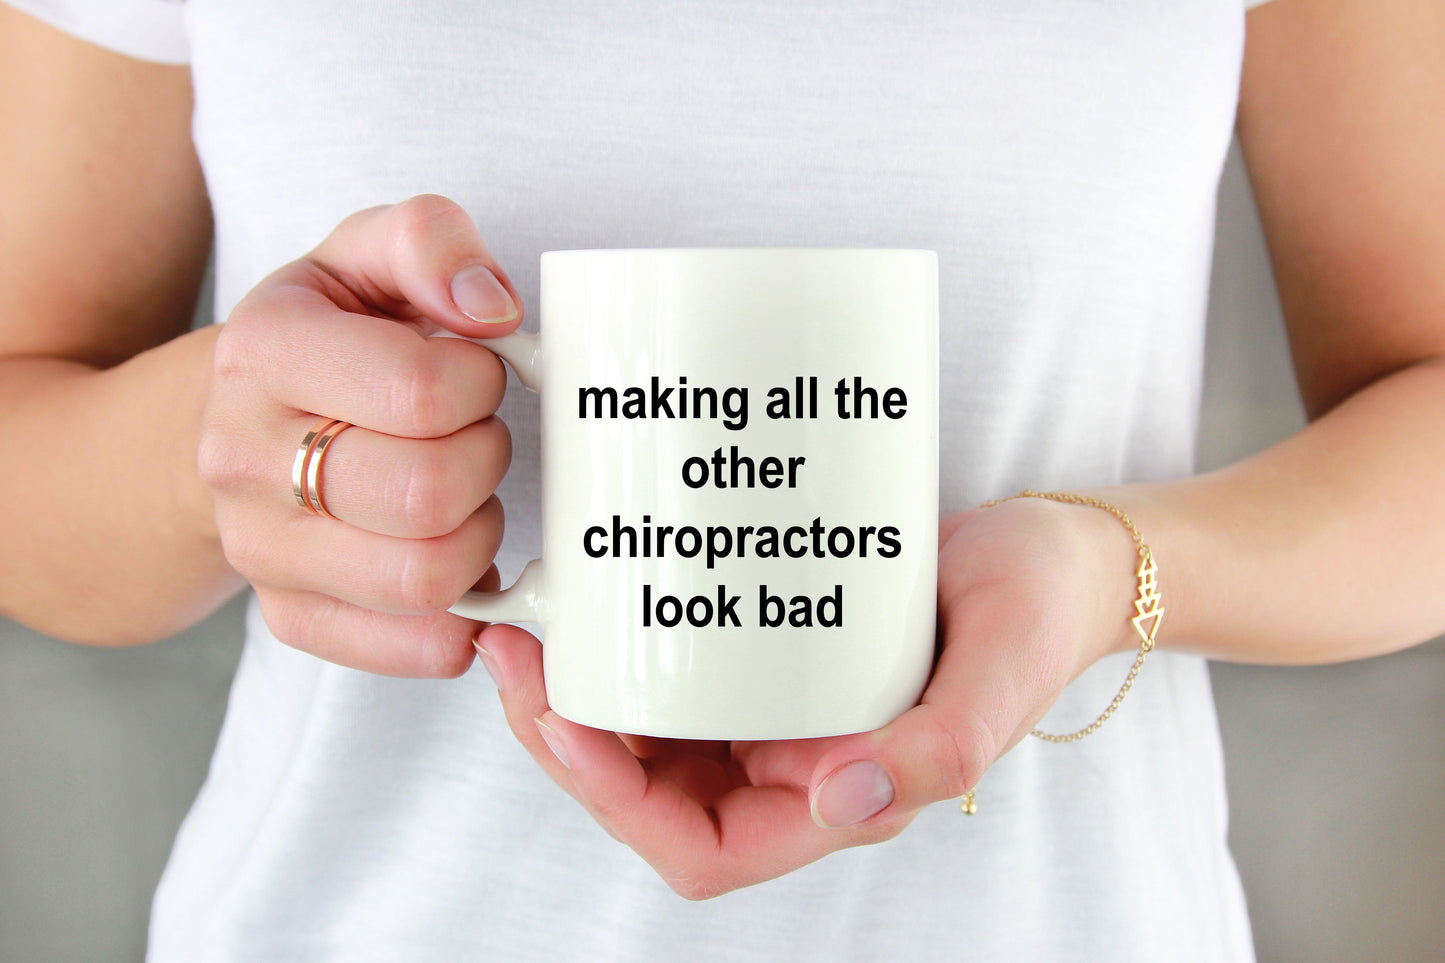 Chiropractor Coffee Mug - Making All The Others Look Bad Funny Novelty Cup Makes a Great Gift